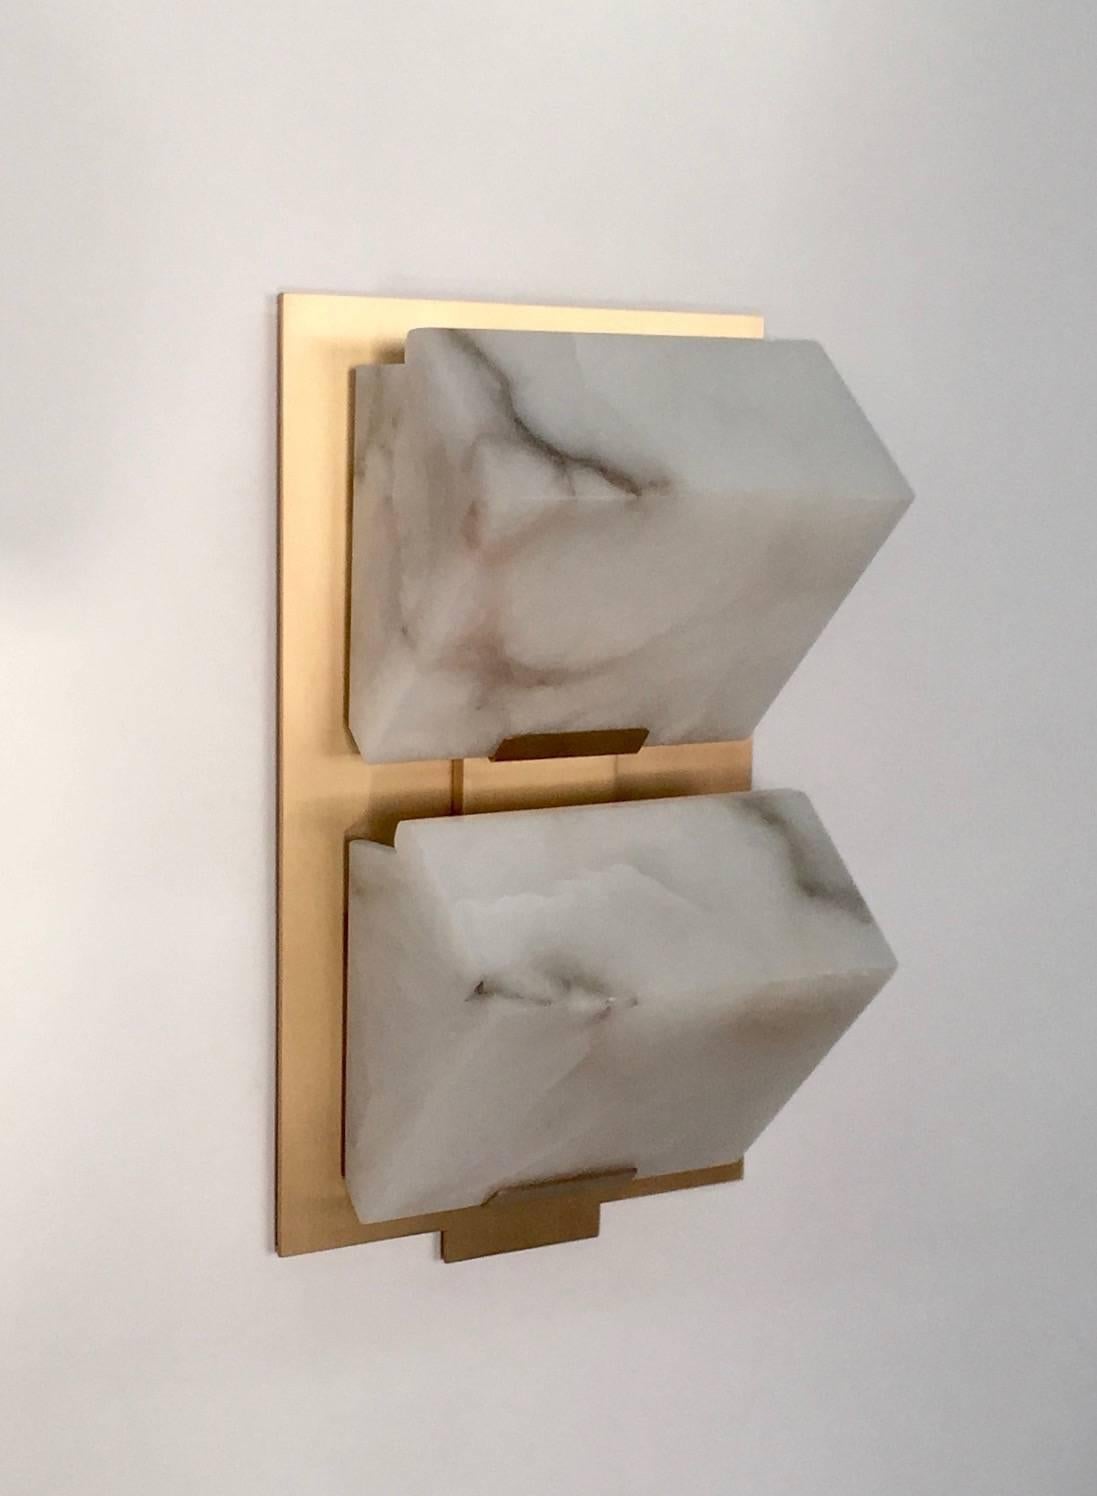 Large 'Block Double Metal' Model #230 Sconce in the Manner of Pierre Chareau For Sale 1